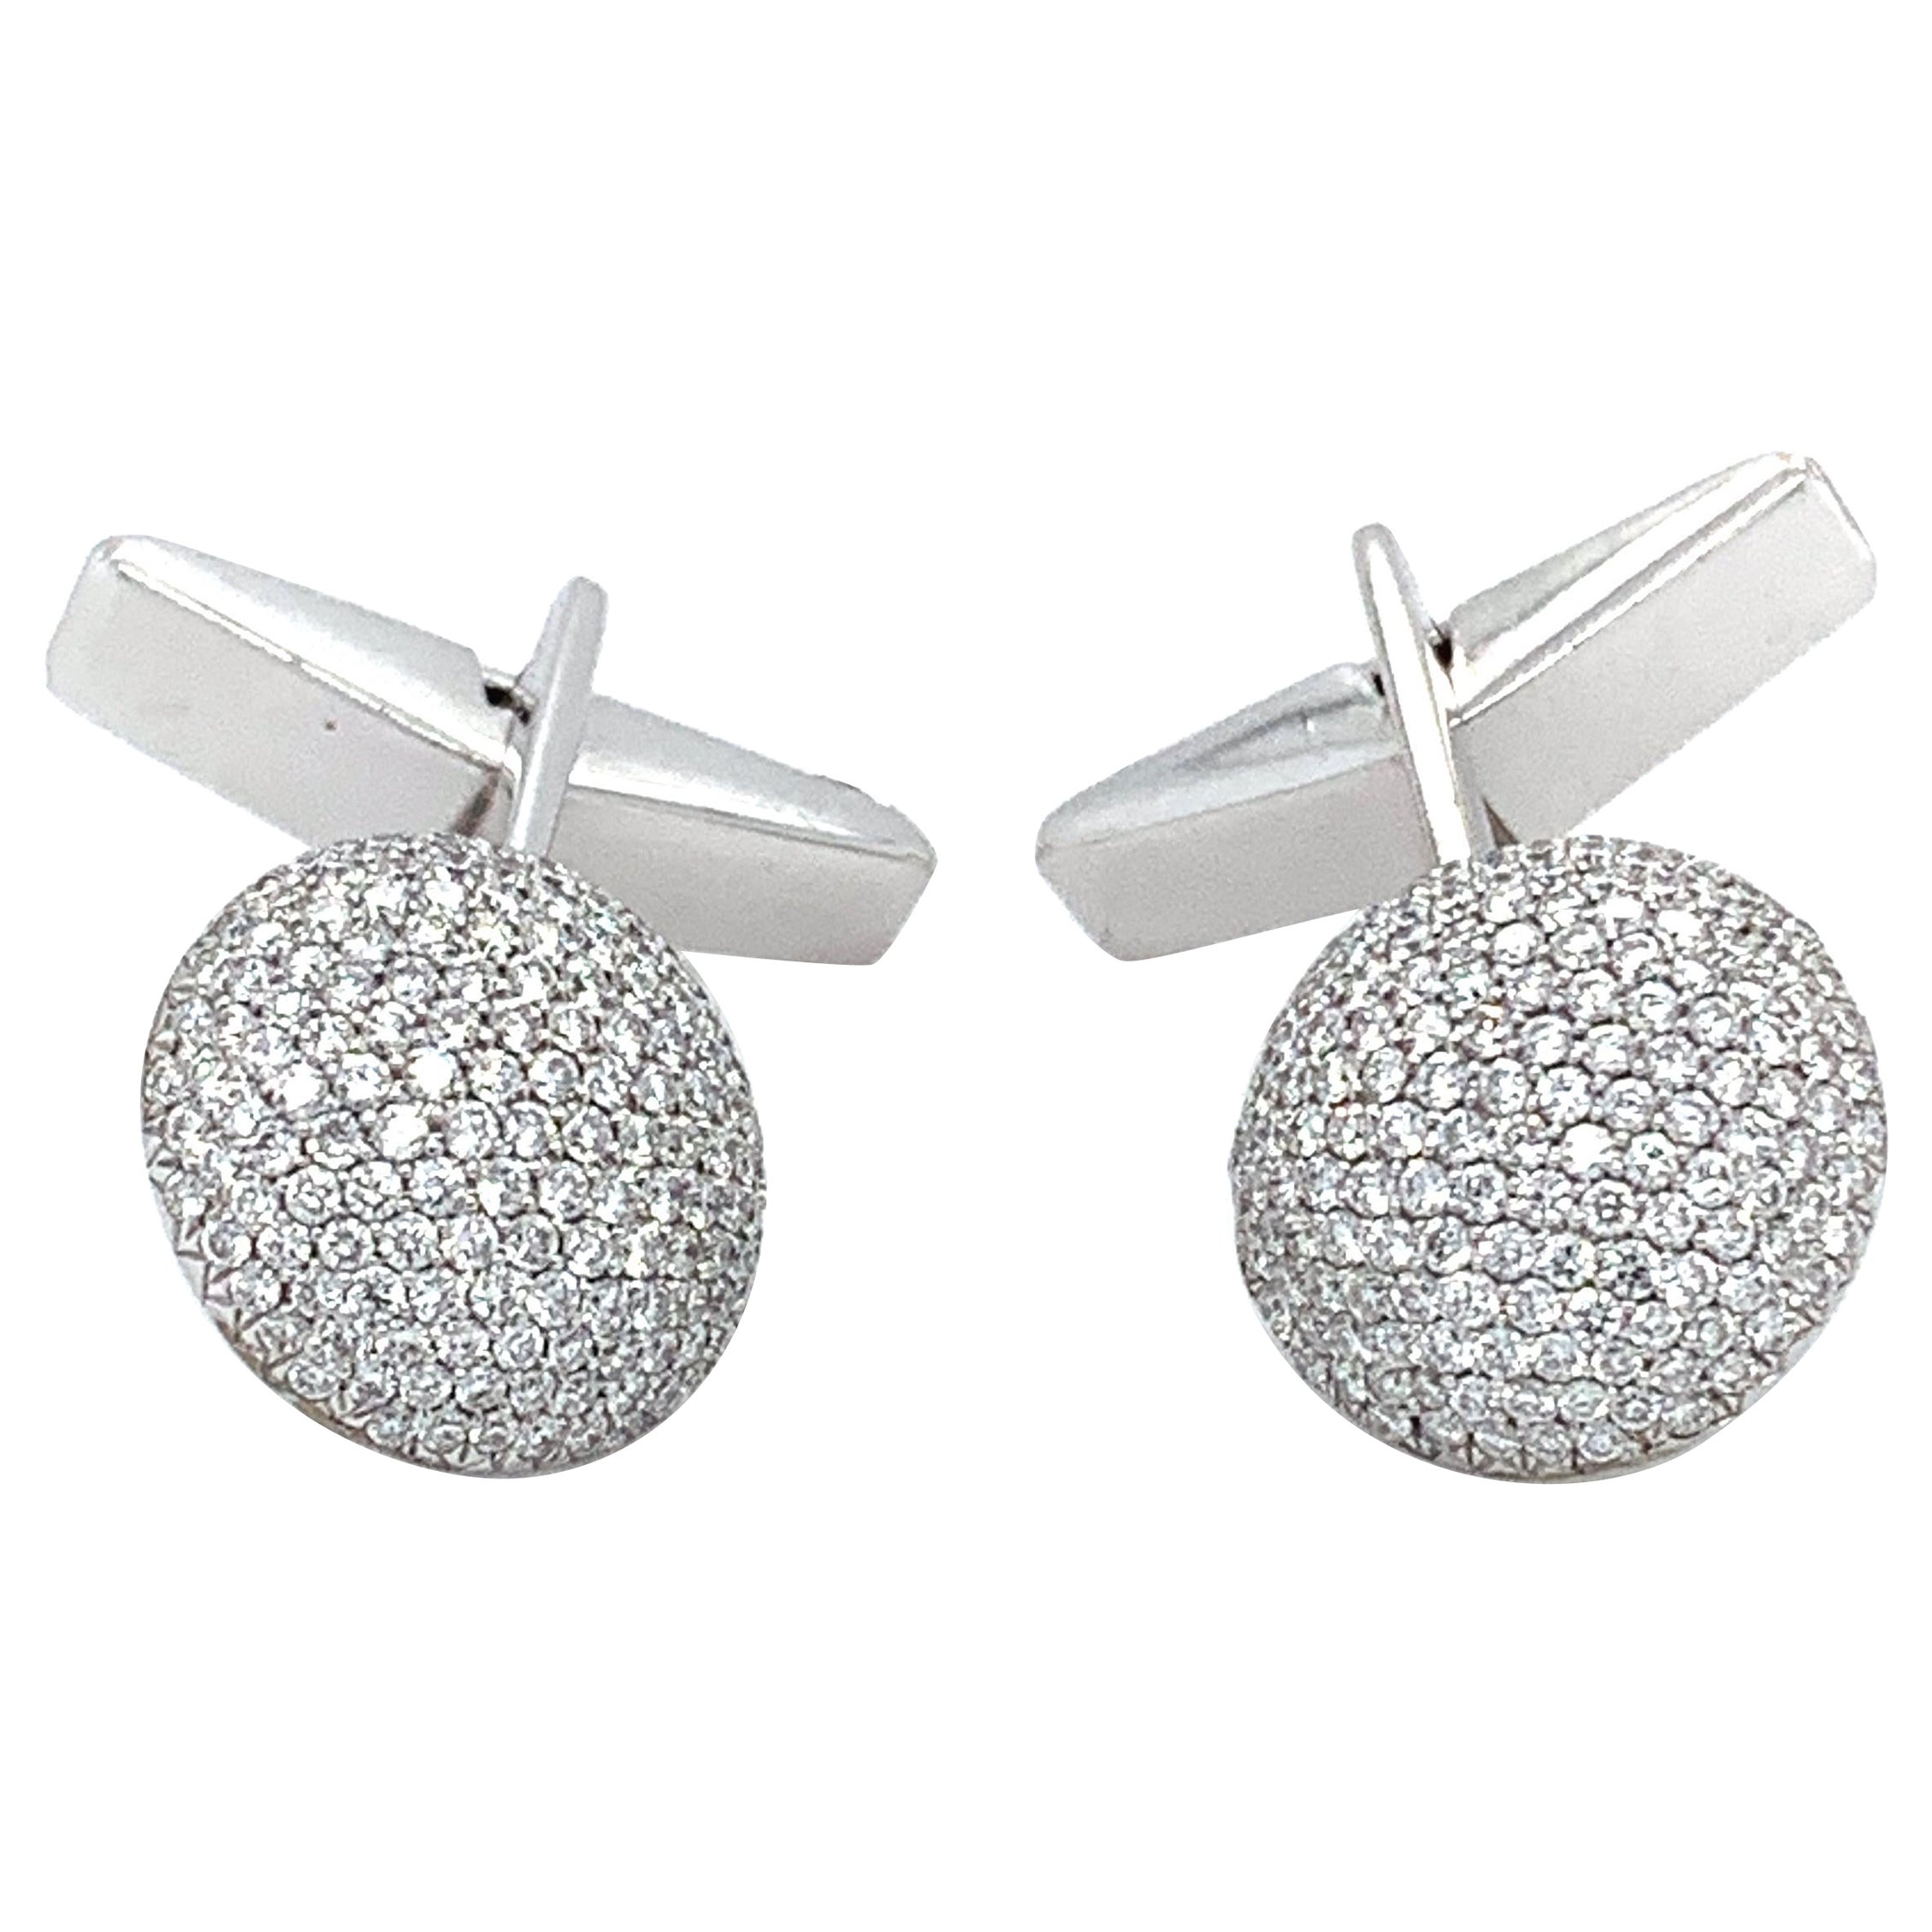 Diamond pave dome gents art deco cufflinks 18k white gold For Sale